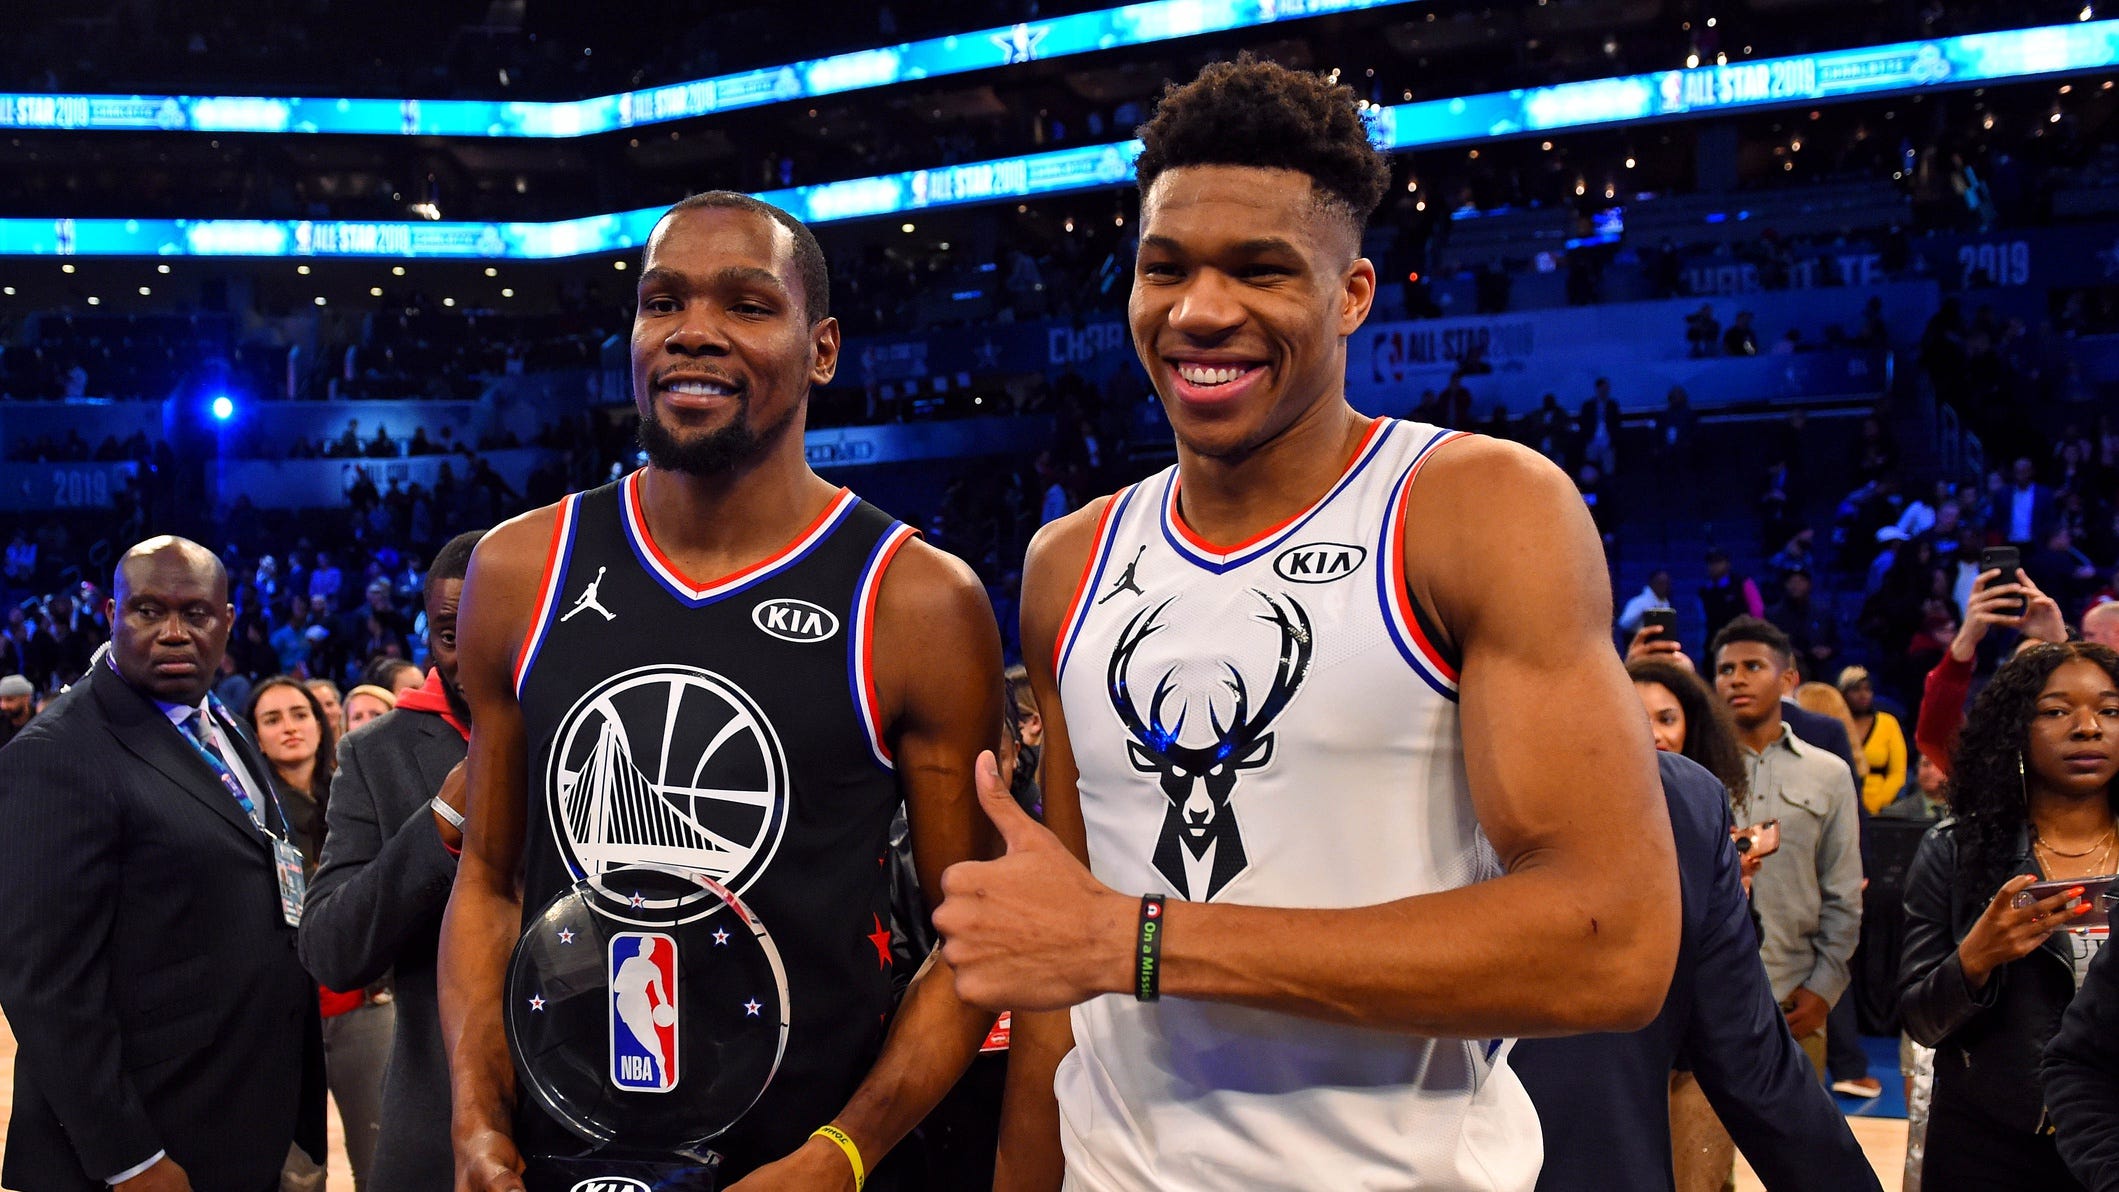 Giannis Vs Kevin Durant Is Nets Or Bucks Star The Bigger Threat